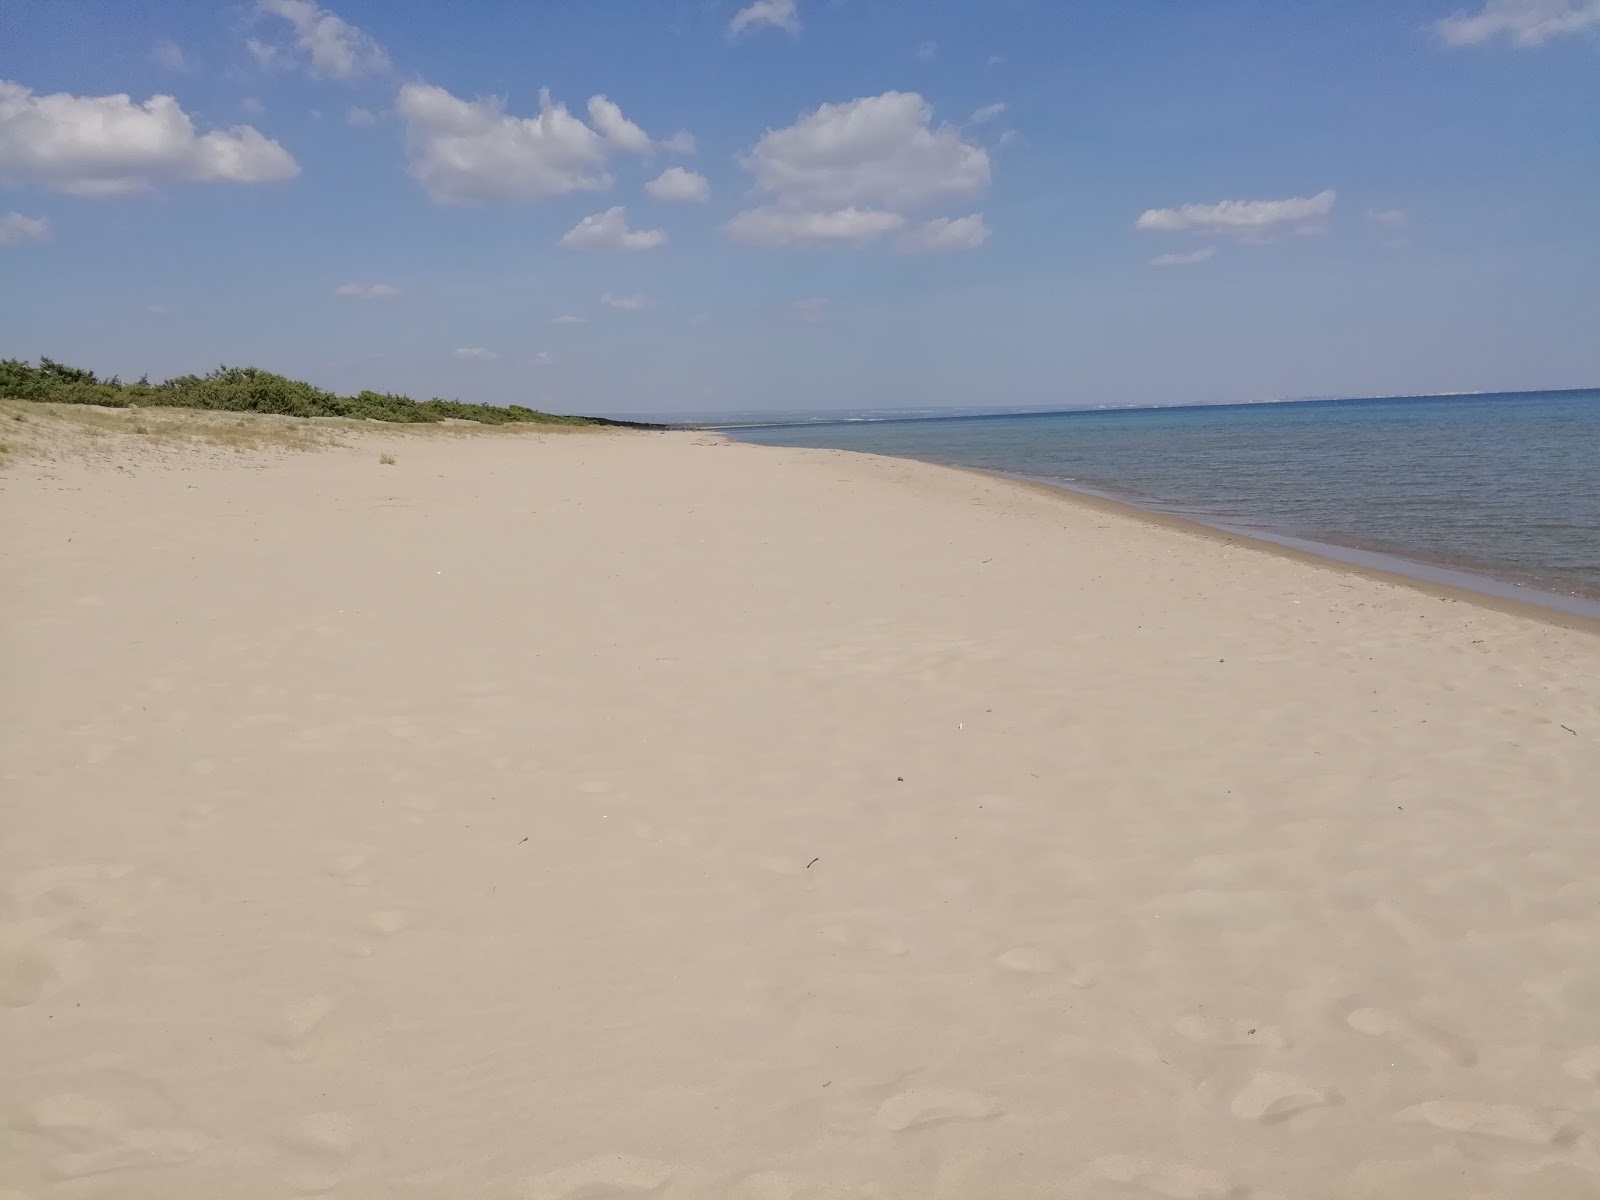 Photo of Spiaggia Termitosa - popular place among relax connoisseurs